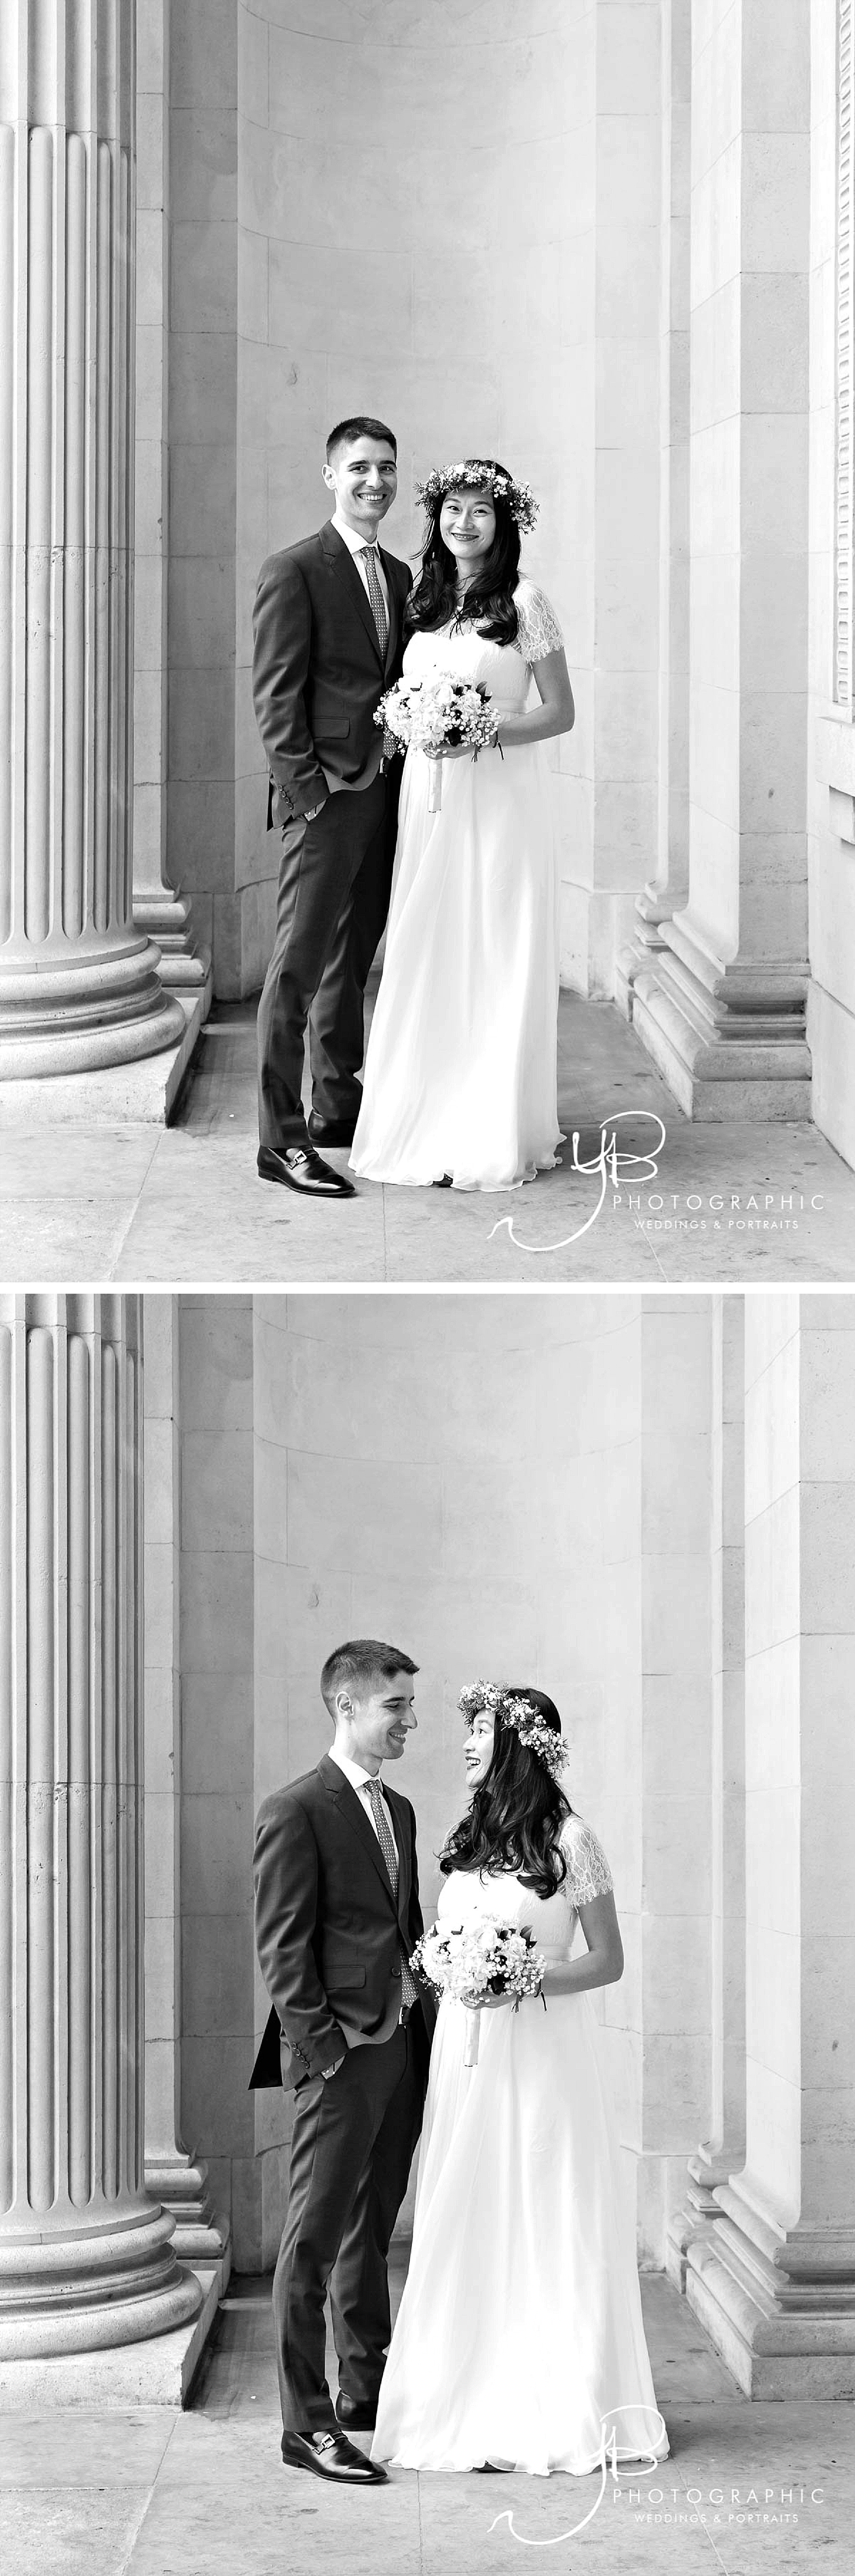 Bride and Groom at the Old Marylebone Town Hall by YBPHOTOGRAPHIC